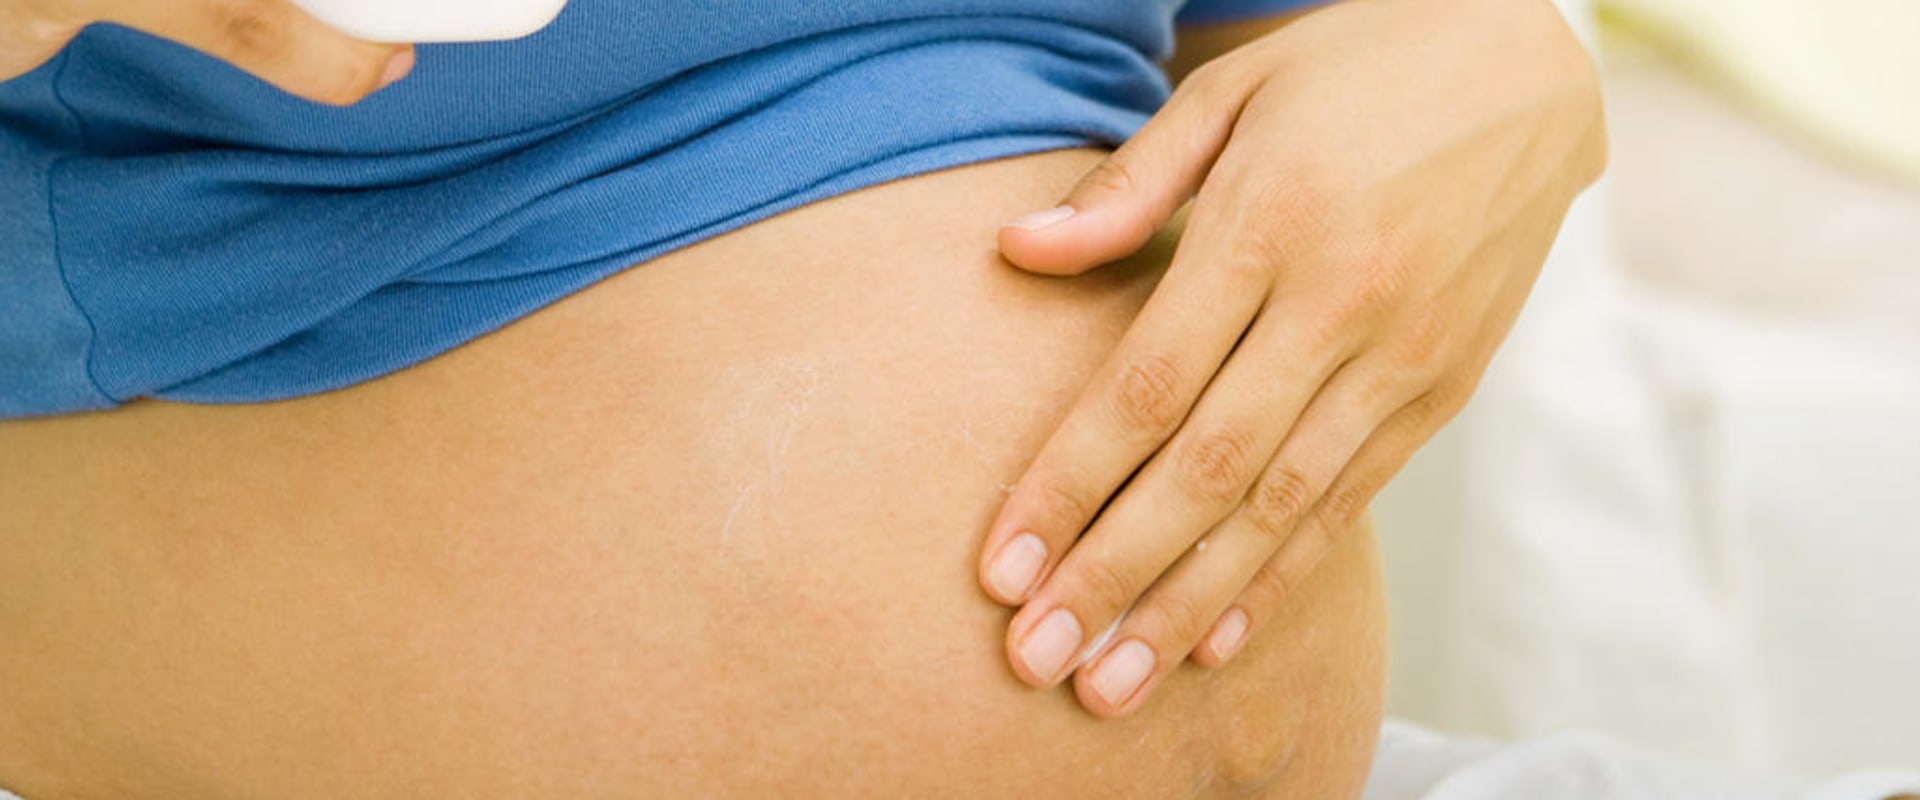 Can a Baby Feel a Massage in the Womb?